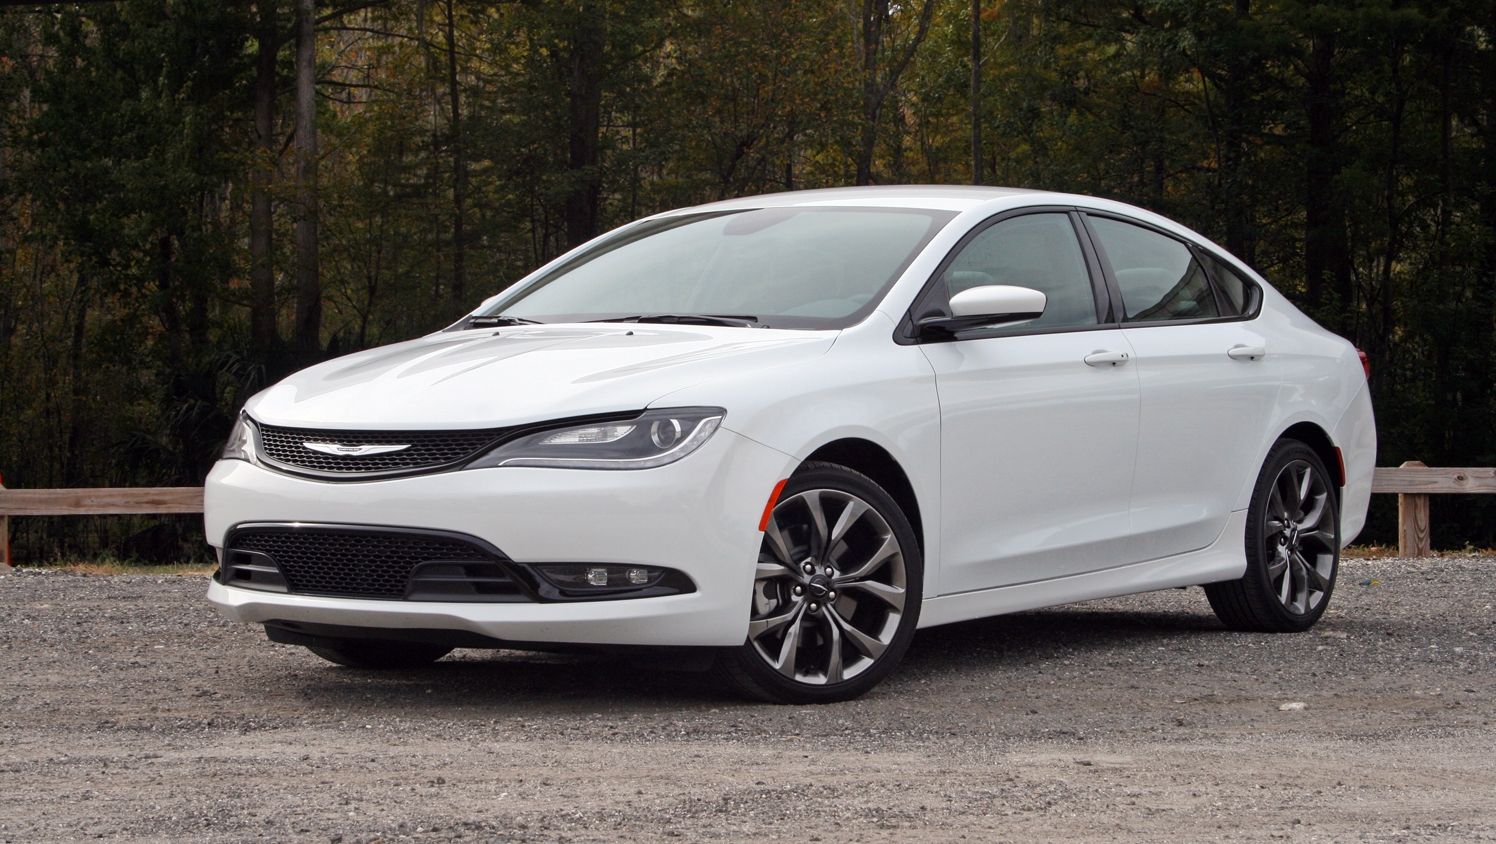  MArk McNabb spent  week with the Chrysler 200 S. See what he thought of it at TopSpeed.com.